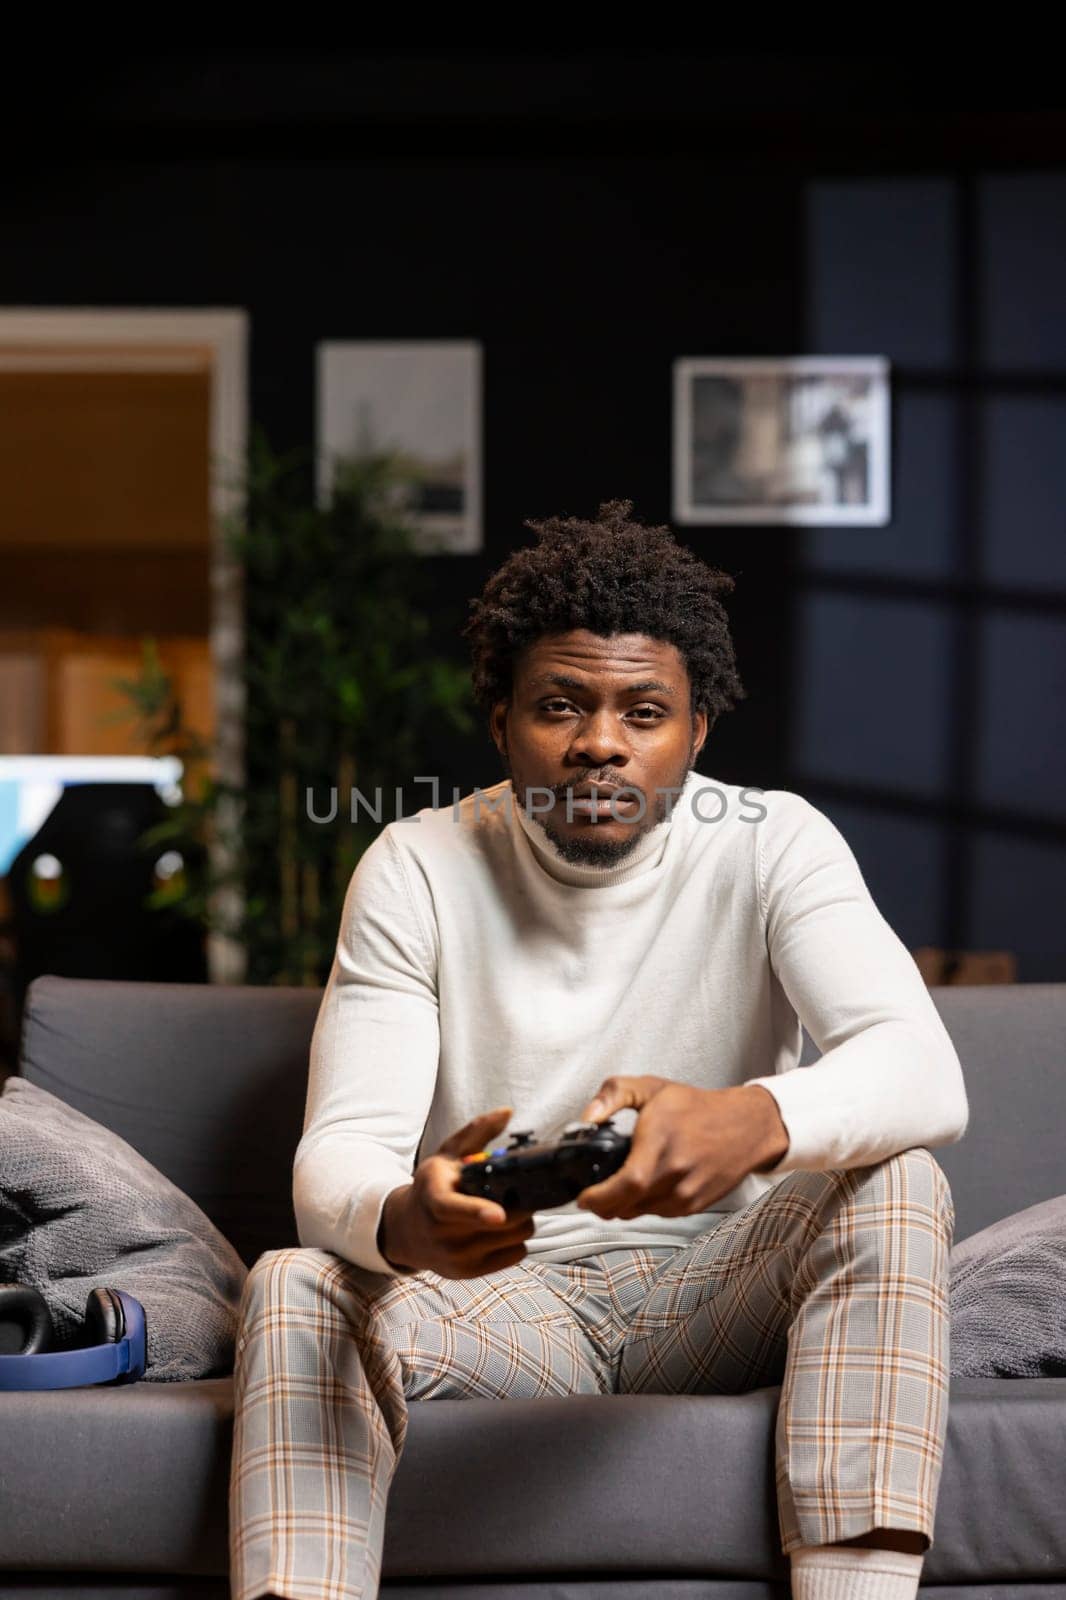 Portrait of man playing boring videogame on gaming console by DCStudio